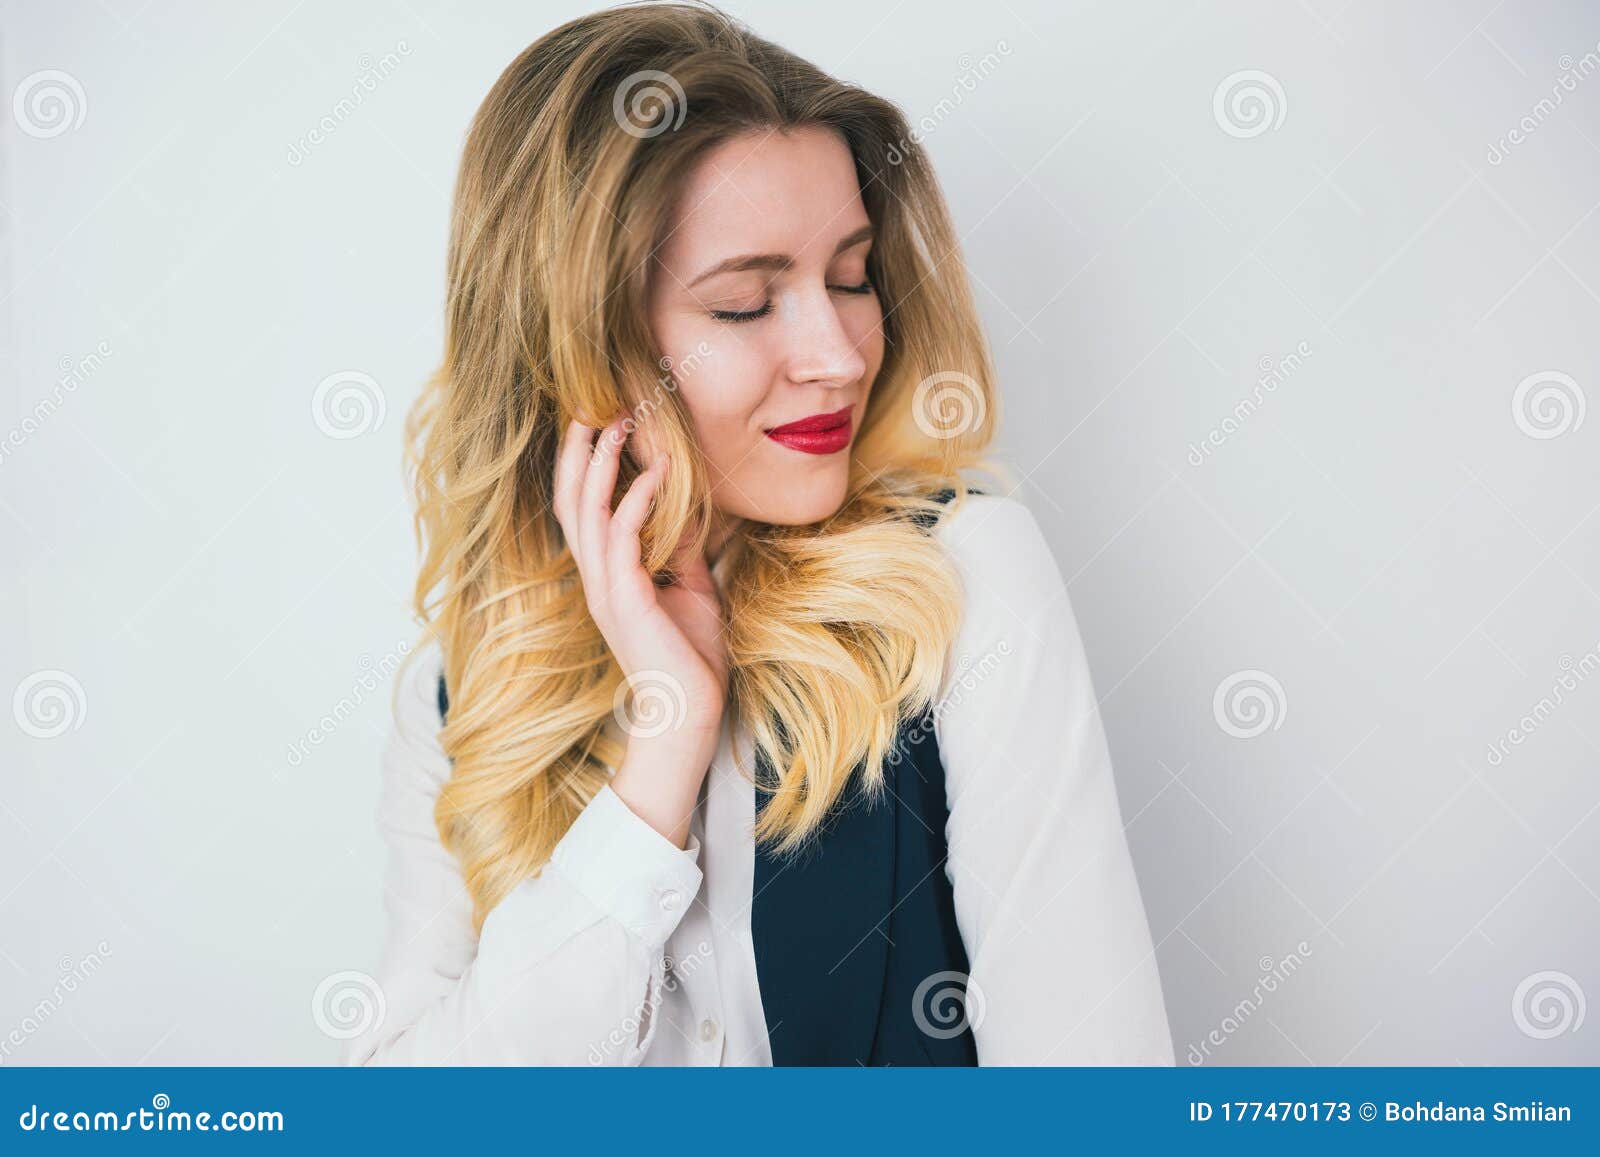 Portrait of Young Blond Beautiful Woman with Red Lips Wearing Smart ...